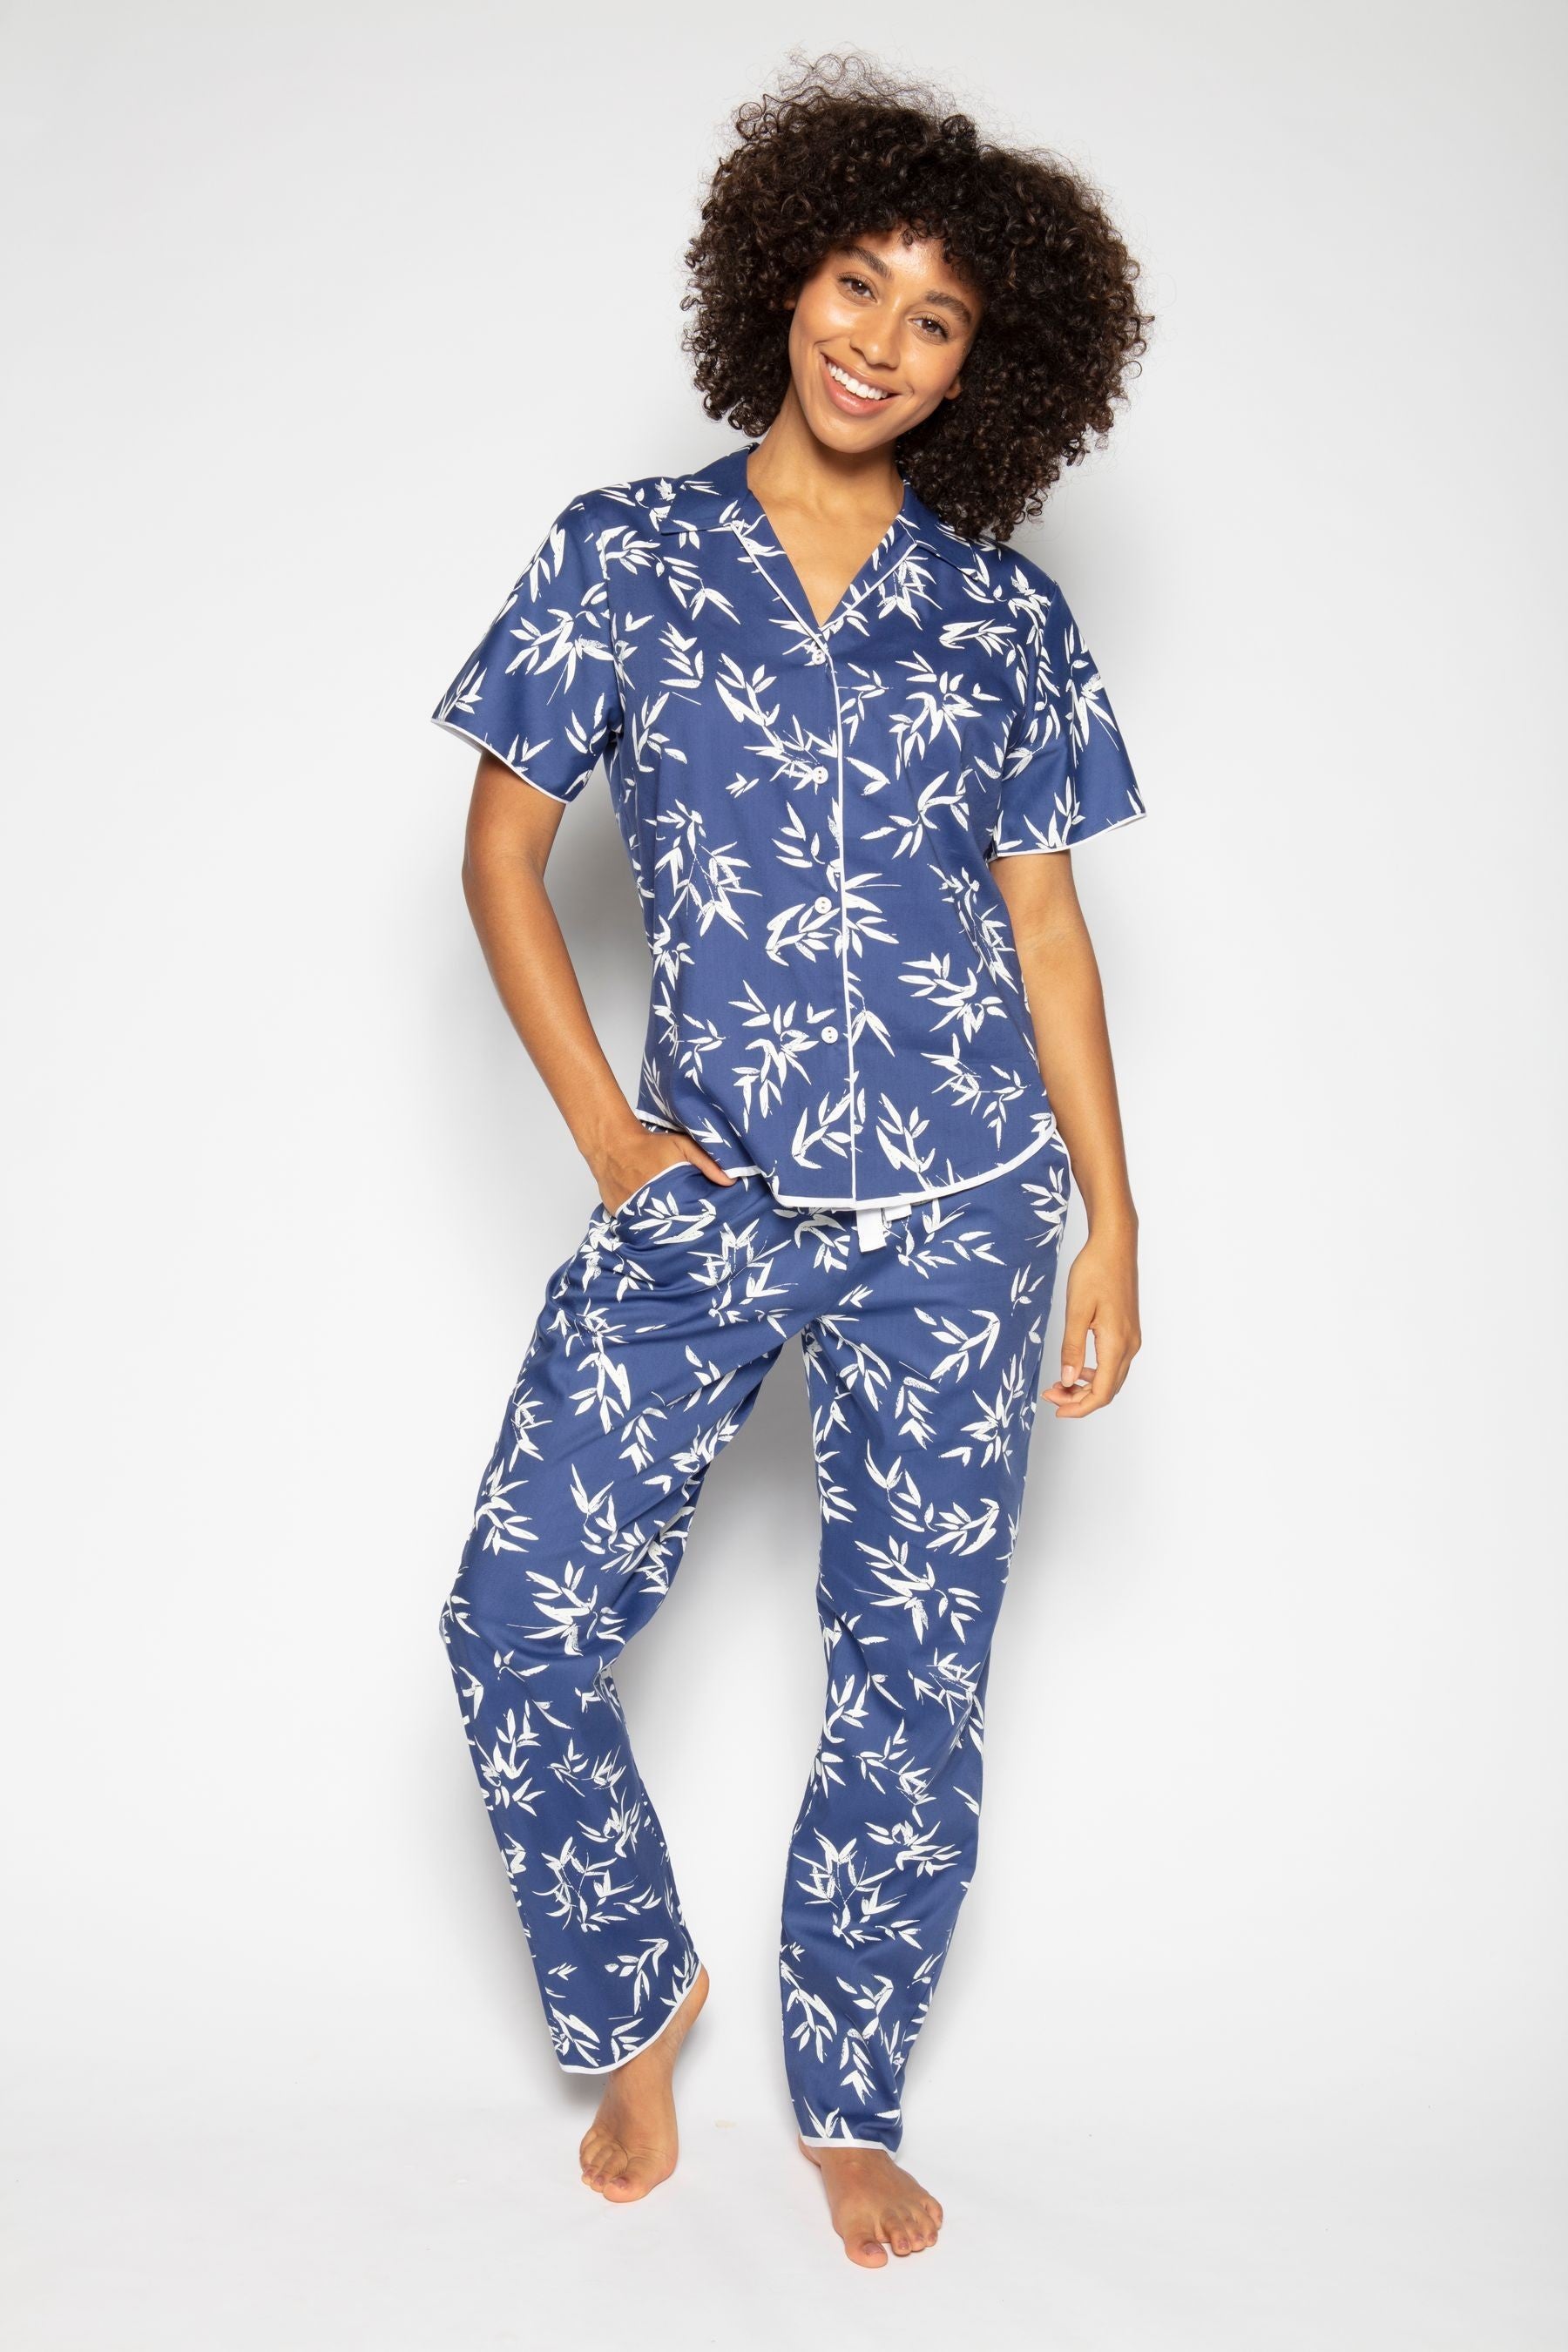 Navy Blue Color Digital Abstract Printed loungewear/Nightsuit For Women With Pants.